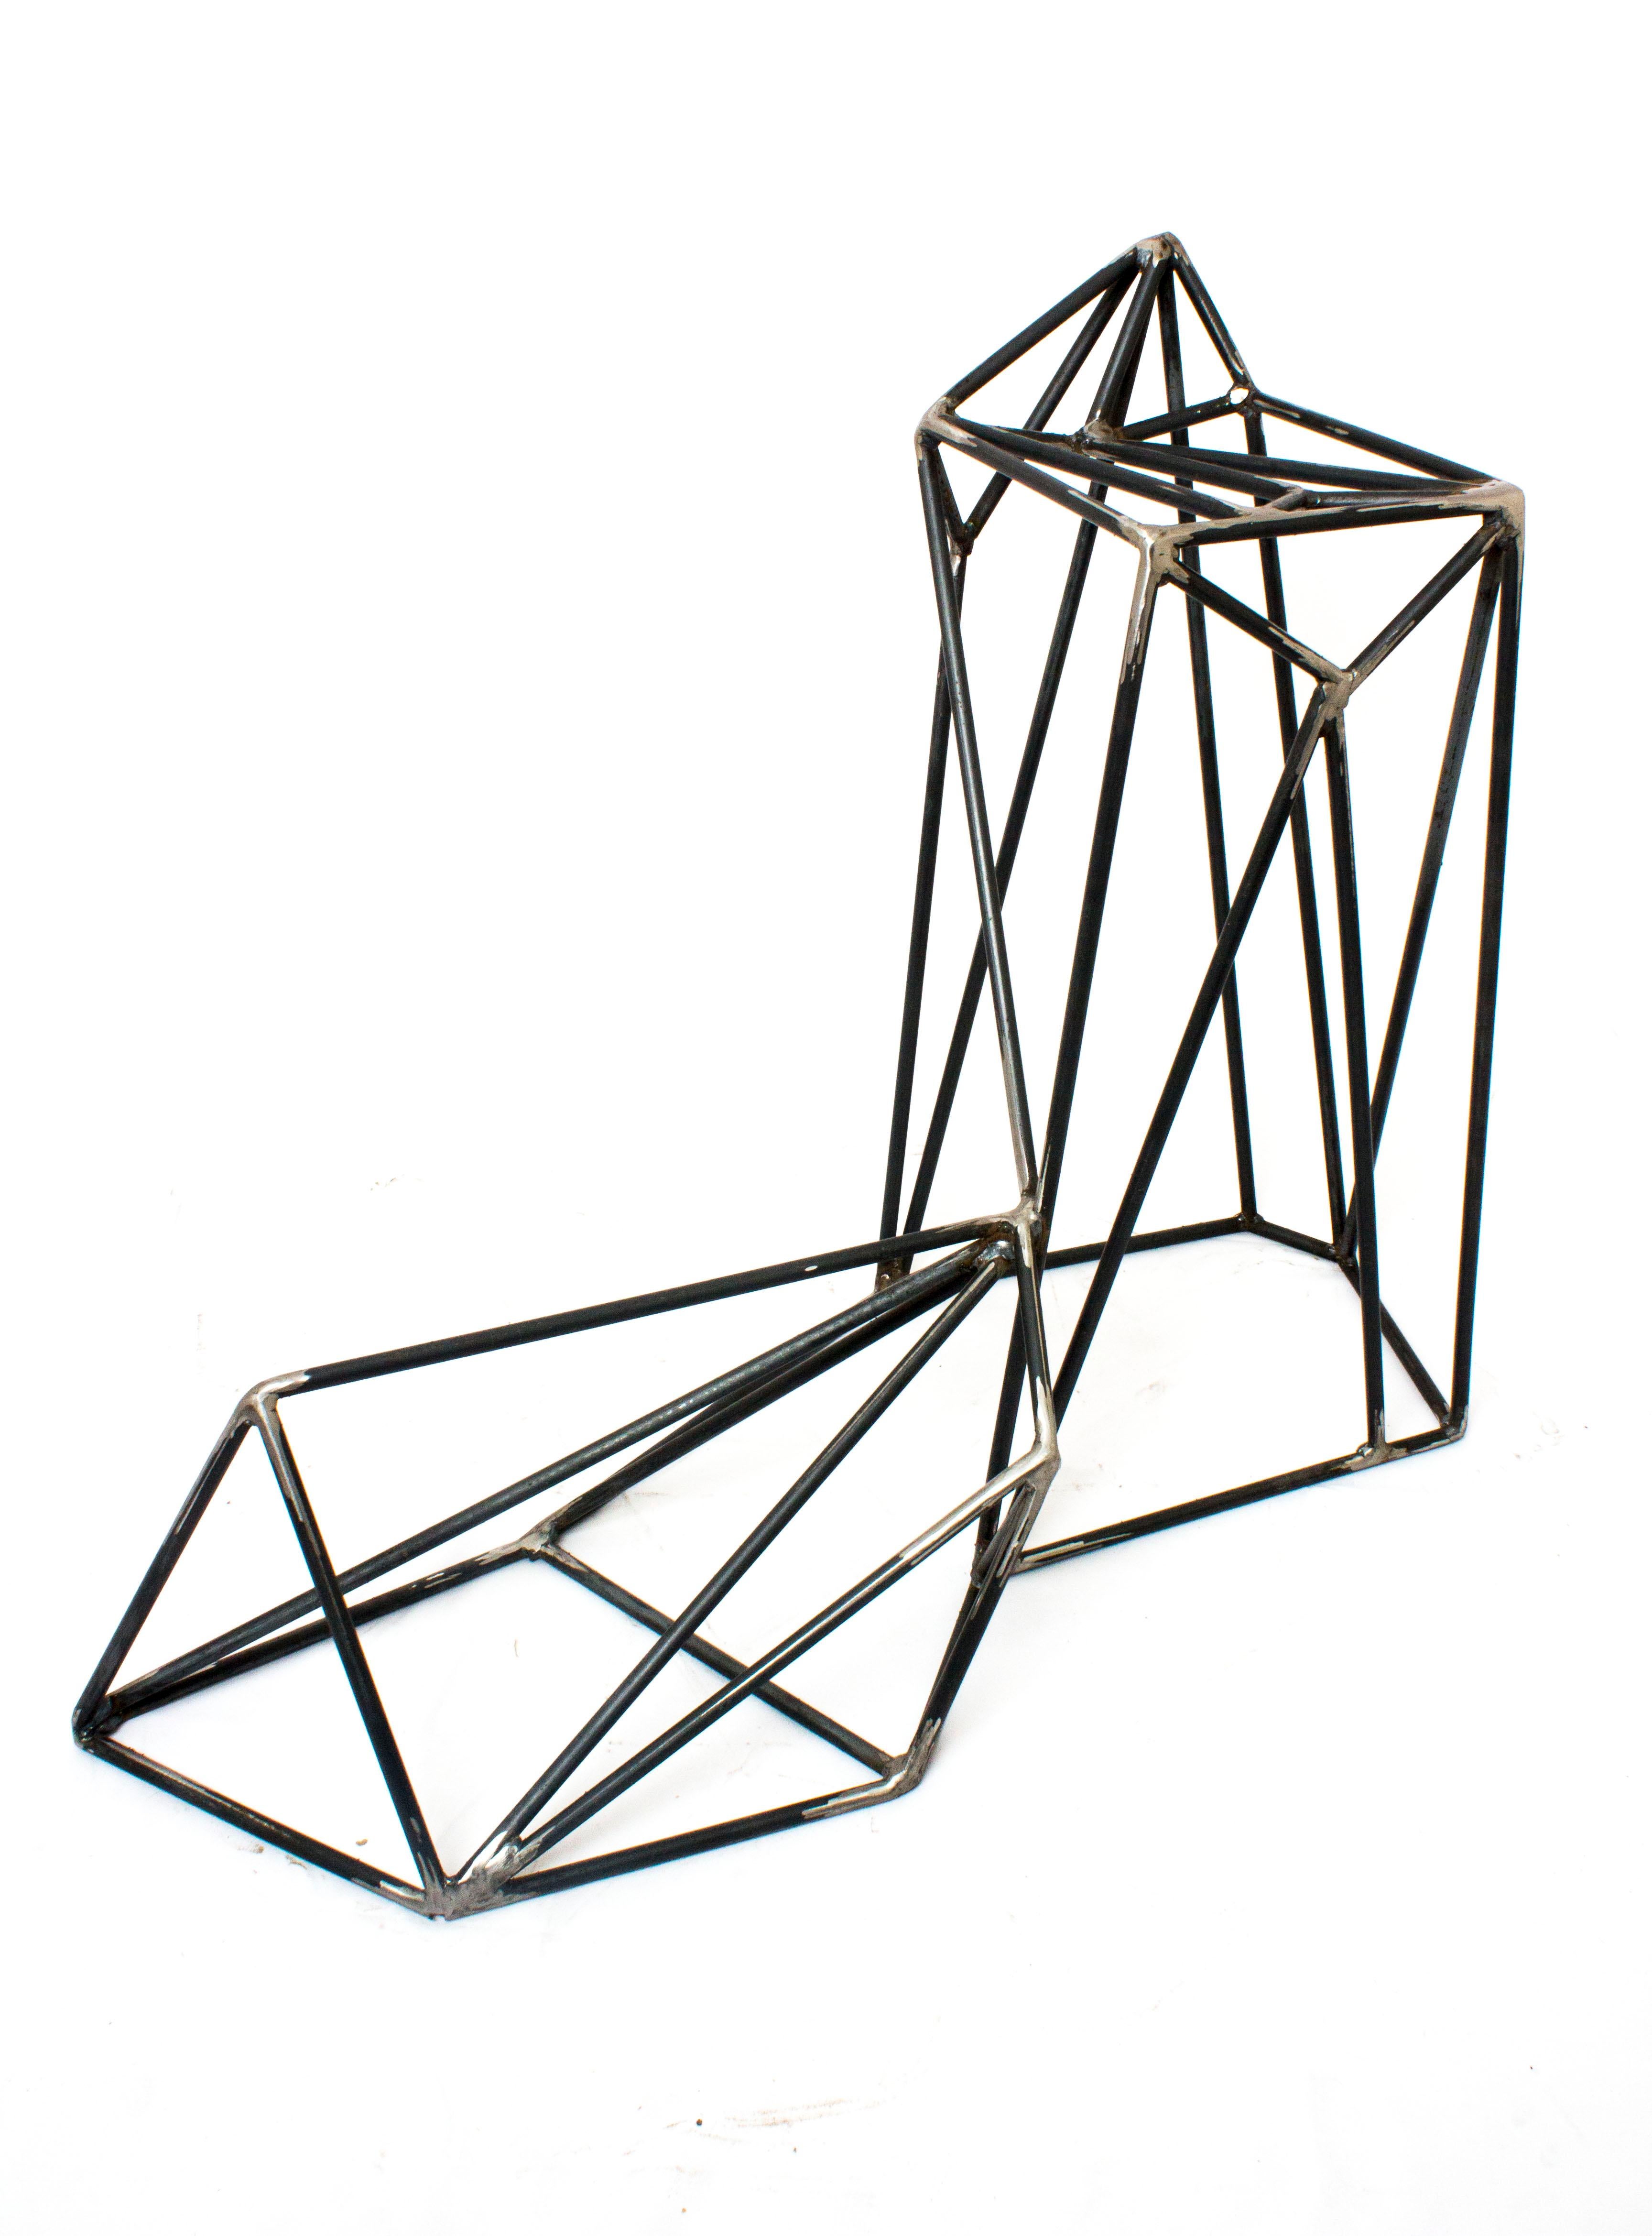 Minimalist Contemporary Floor Sculpture in Steel by Mtharu For Sale